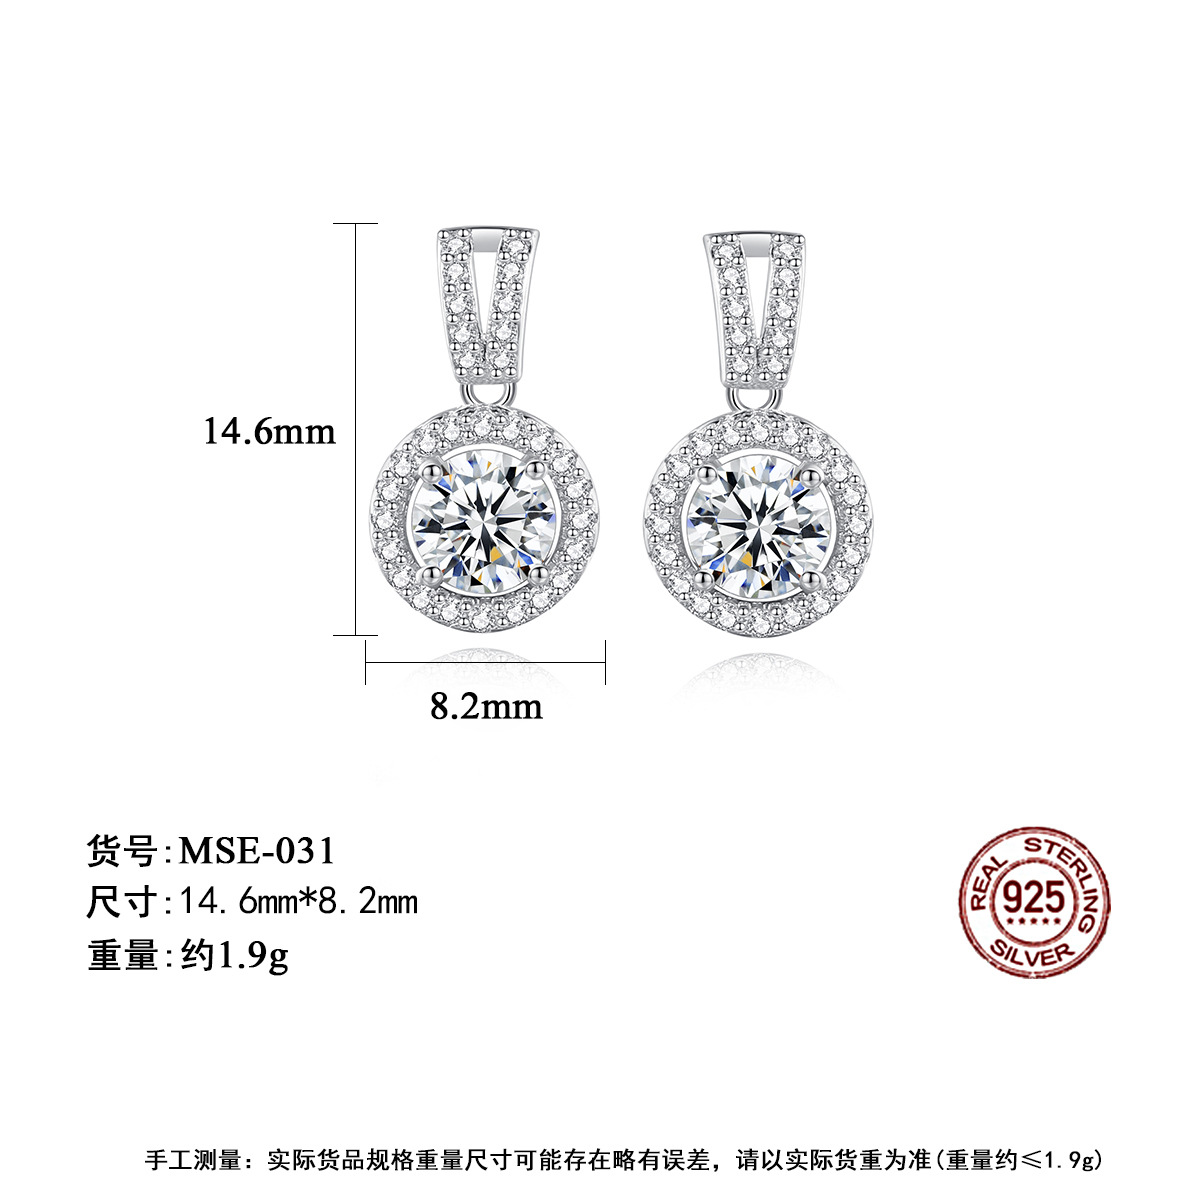 Pag & Mag Moissanite Earrings S925 Sterling Silver Stud Earrings 5.0mm Disc Support Identification Factory Direct Supply